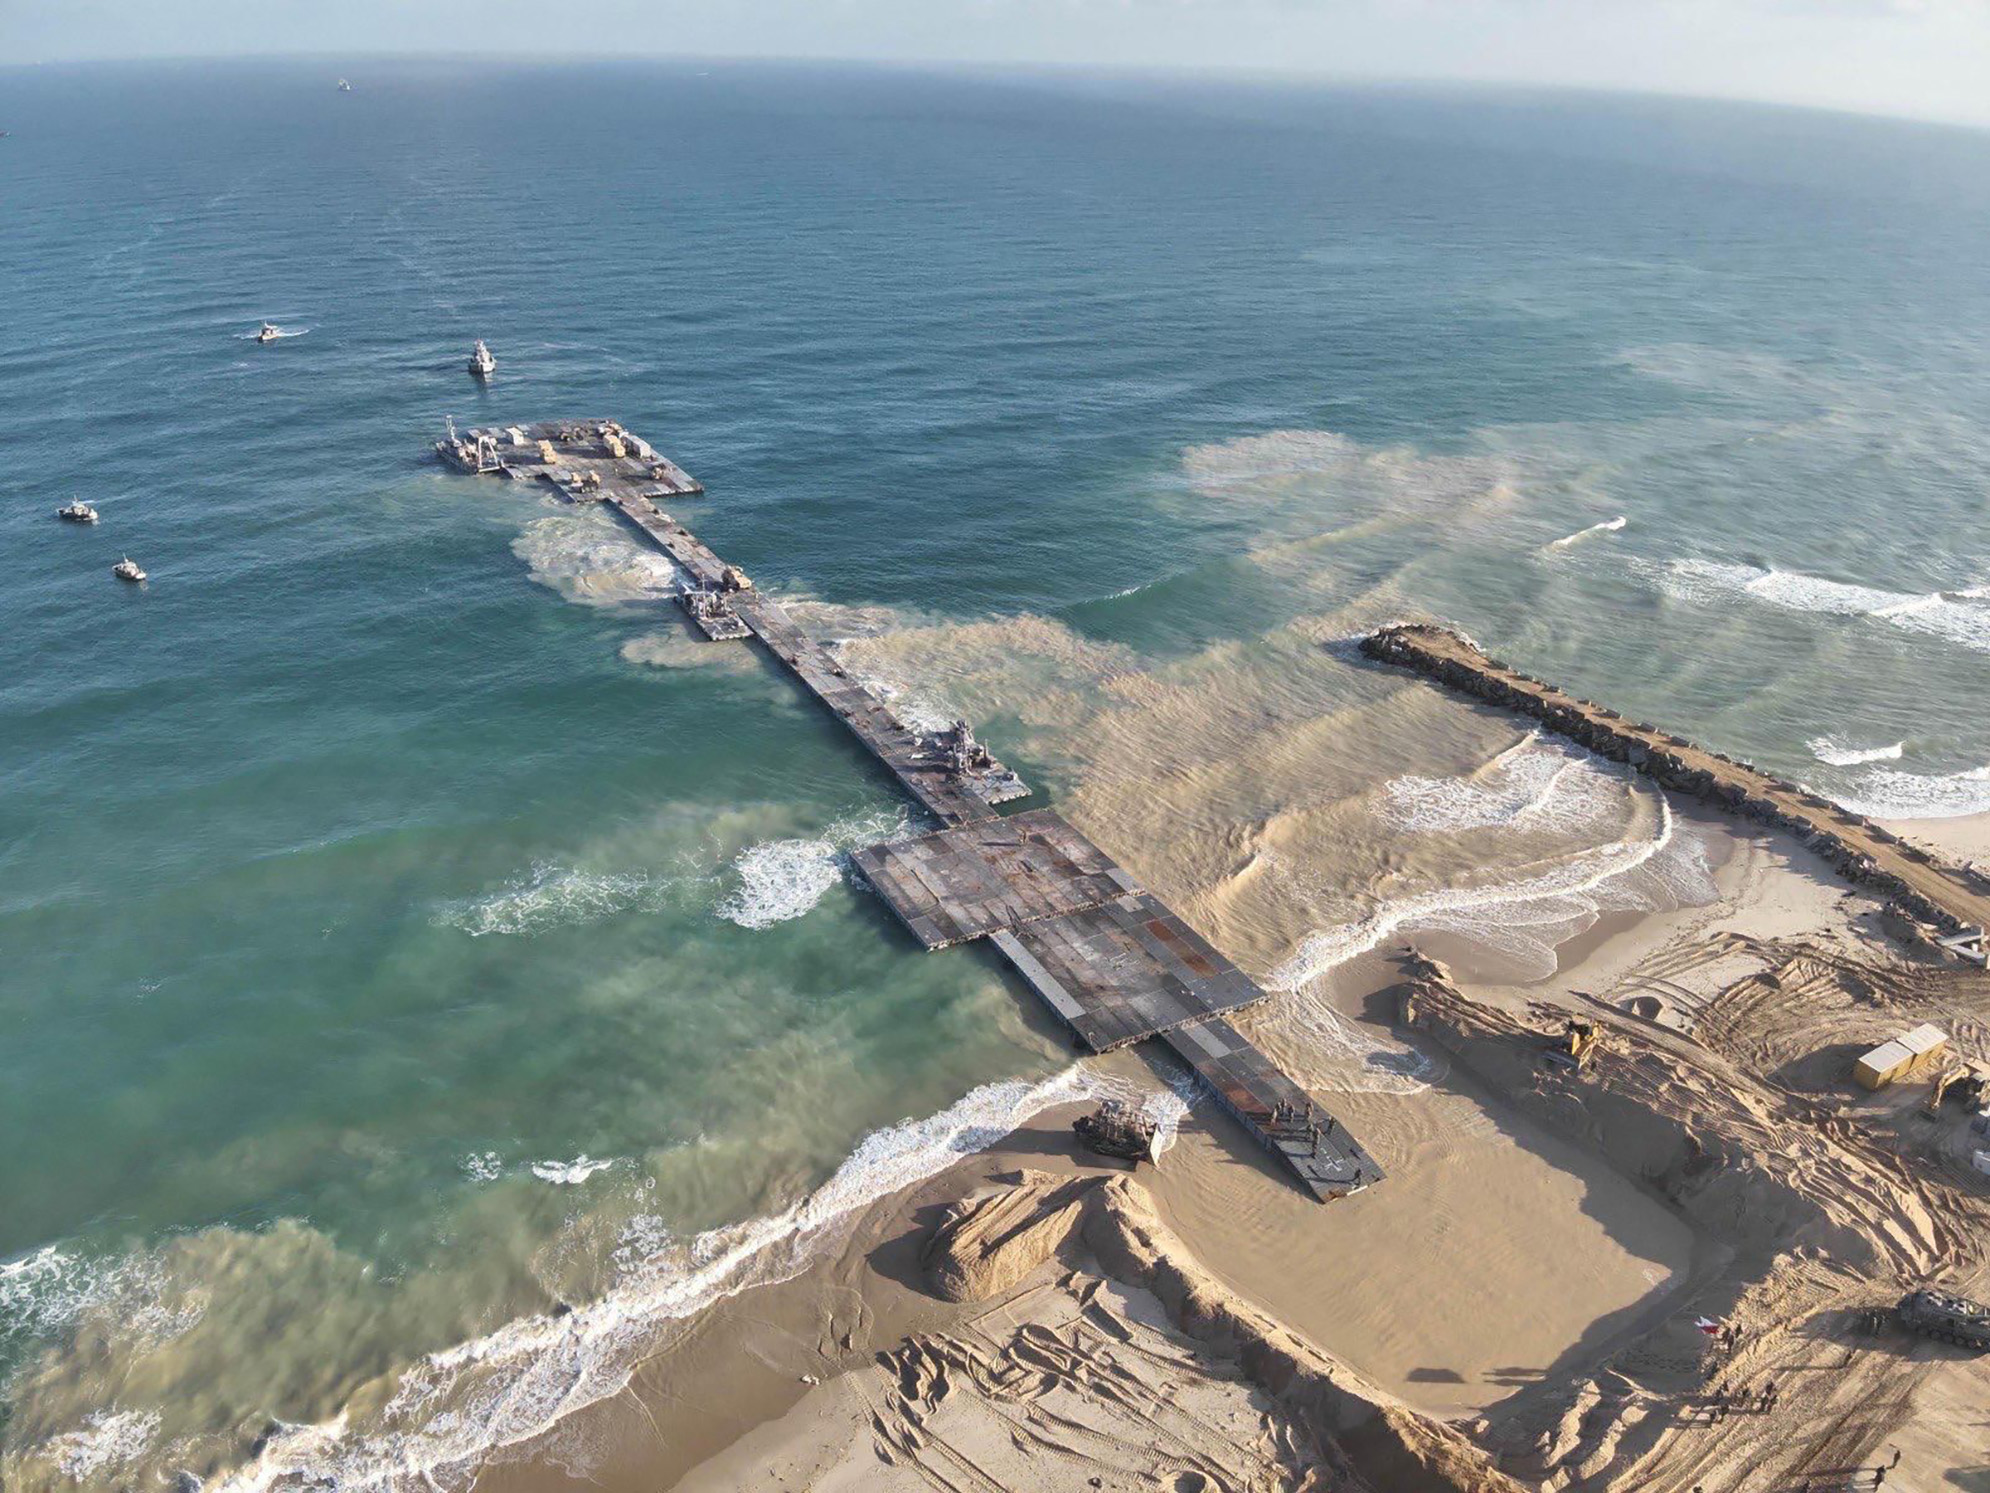 cover Gaza aid jetty being reattached after repairs